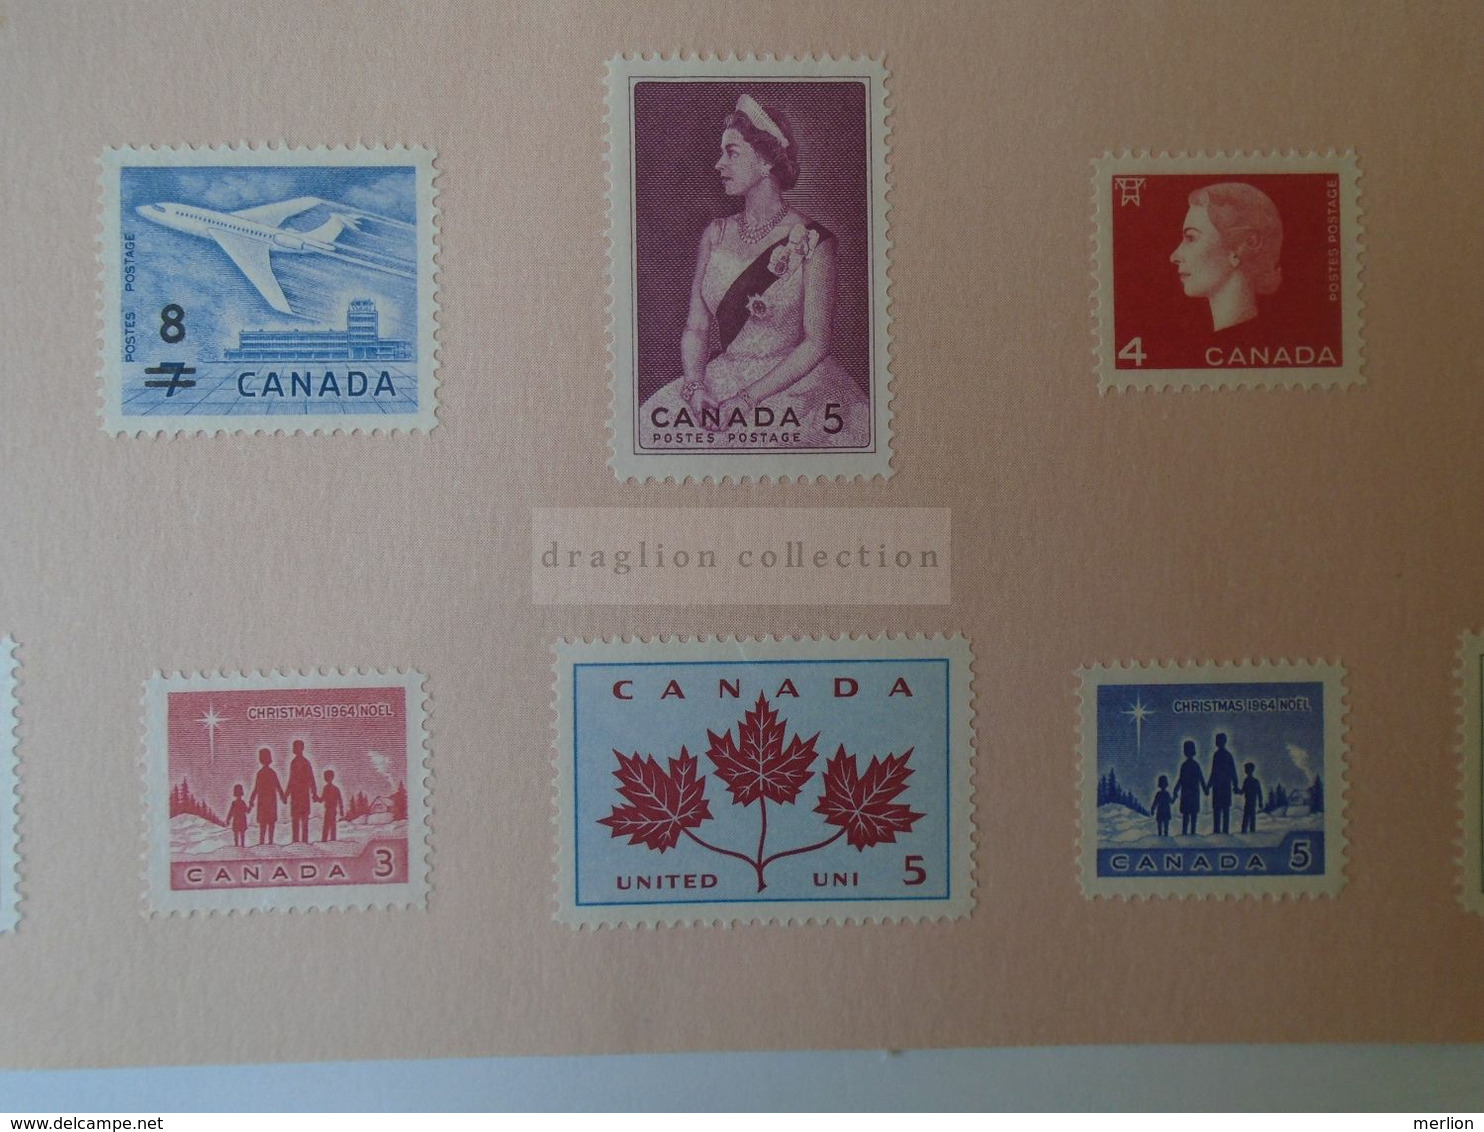 J1218   Canada 1964  Lot Of  2  Souvenir Cards  With Stamps Attached   1964/65 - Canadese Postmerchandise